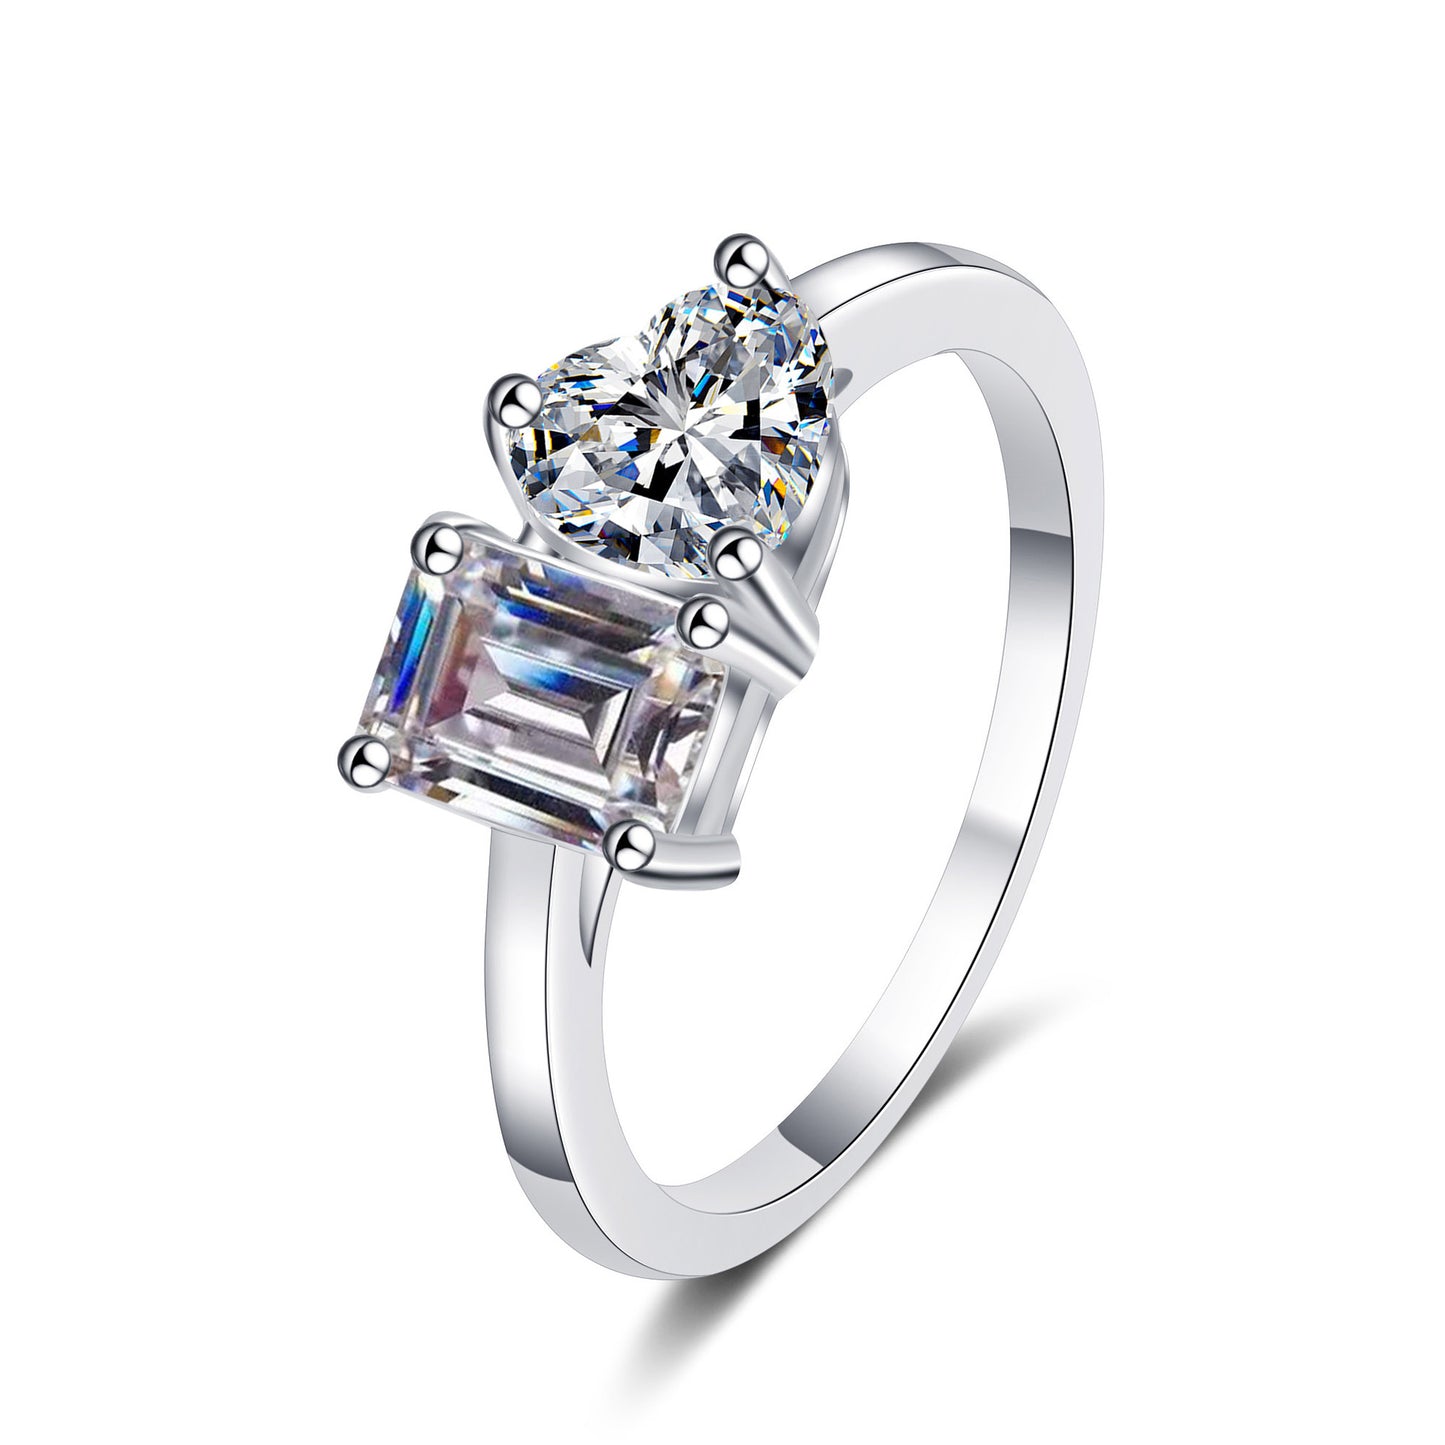 Fashionable emerald cut/radiant cut S925 sterling silver moissanite ring #MR00044